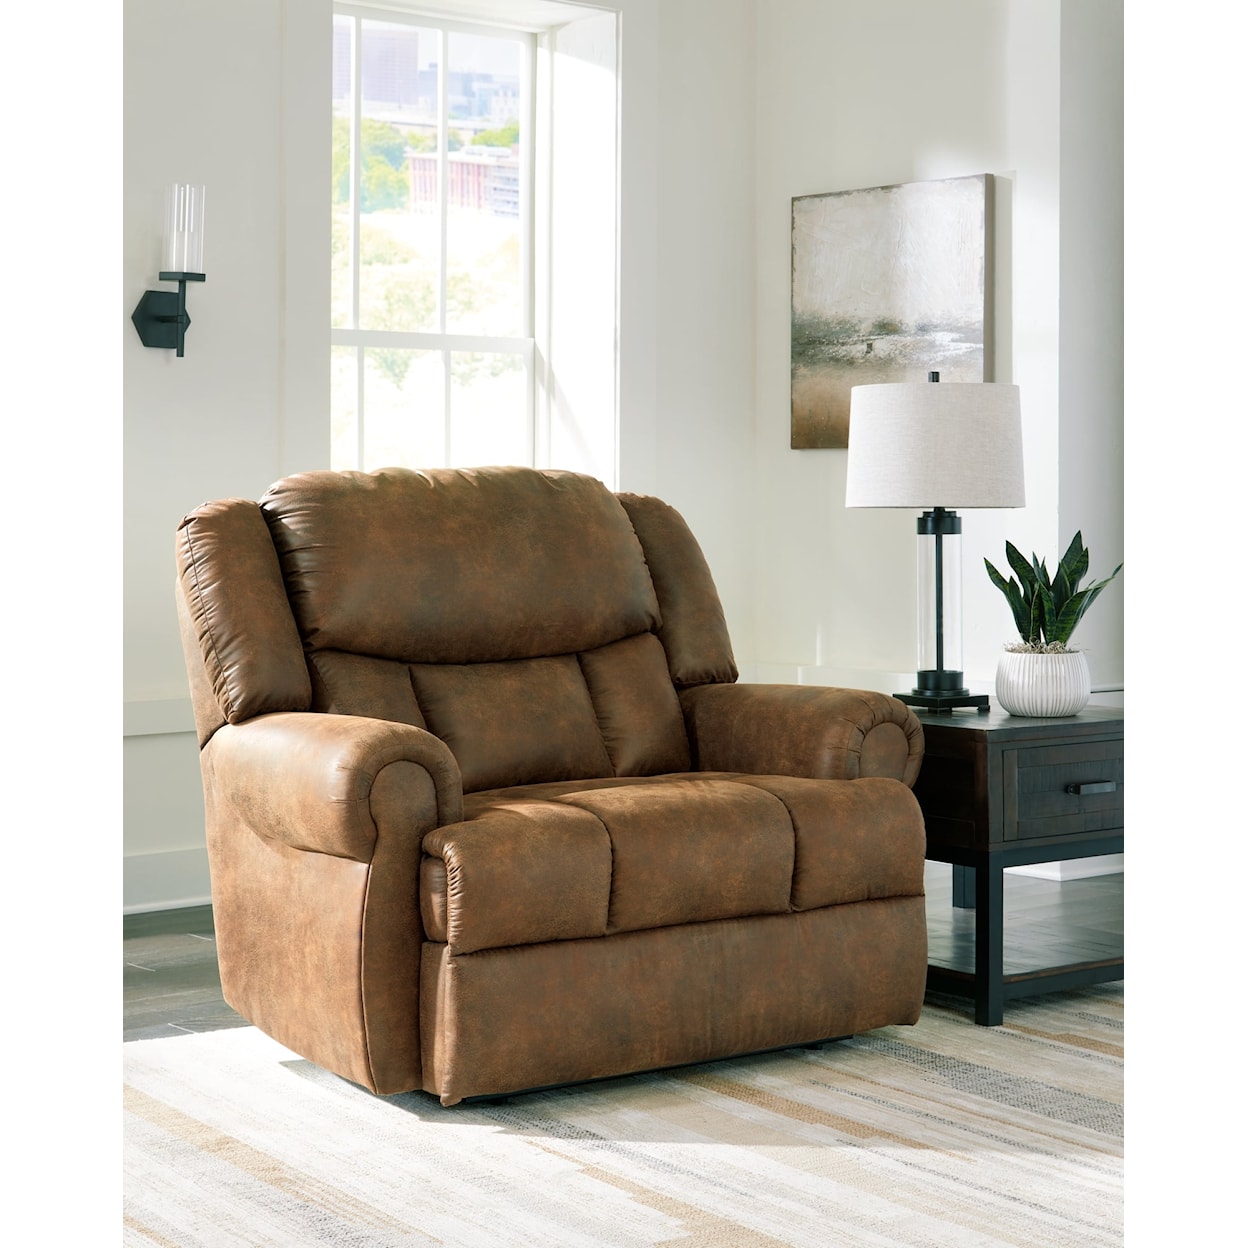 Signature Design by Ashley Boothbay Wide Seat Power Recliner